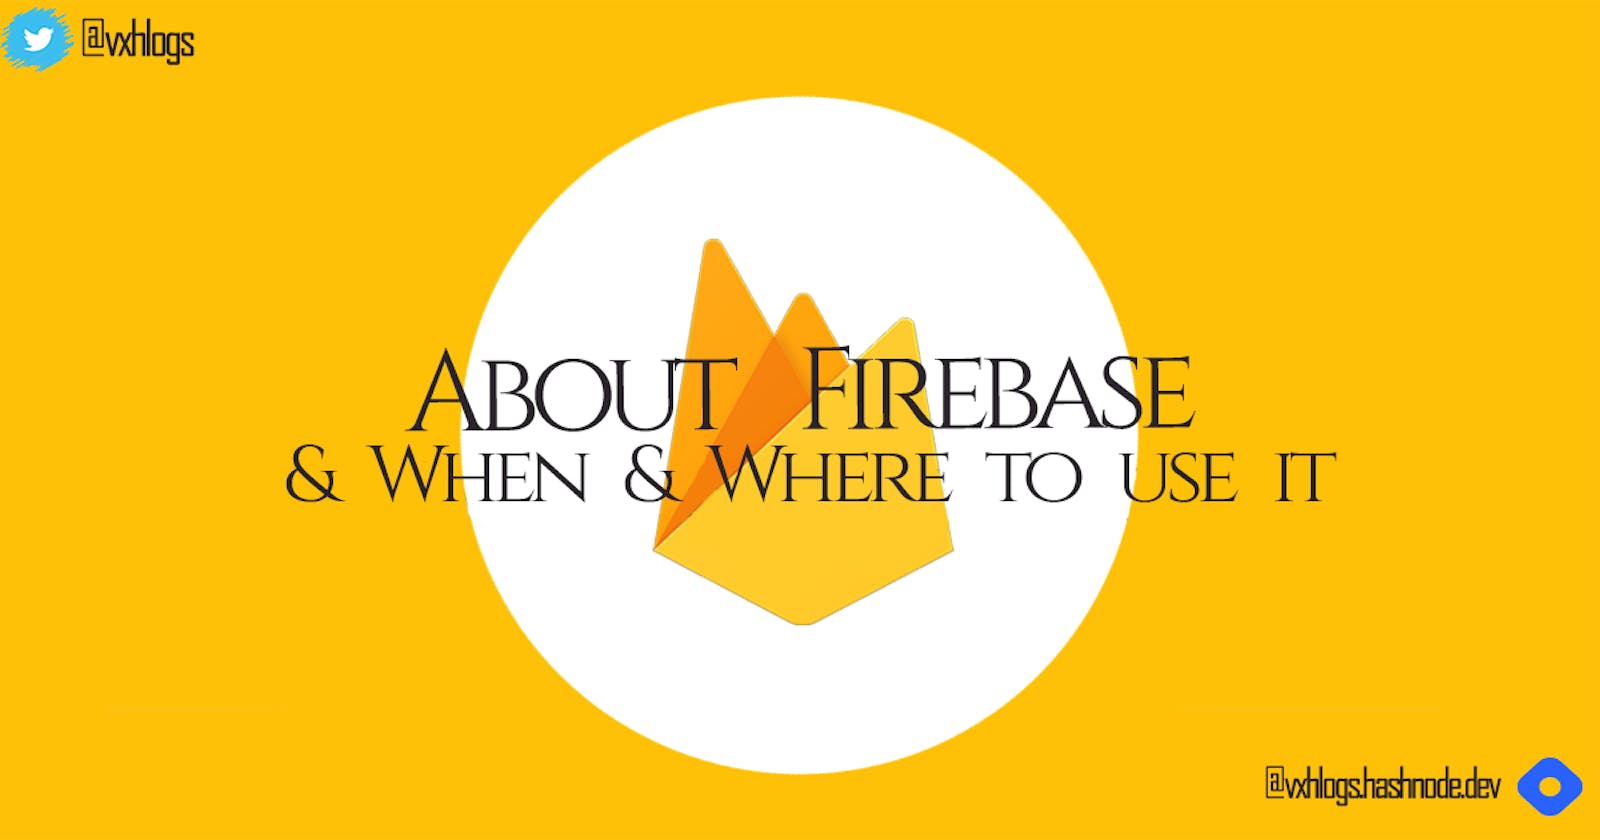 About Firebase & When & Where to use it